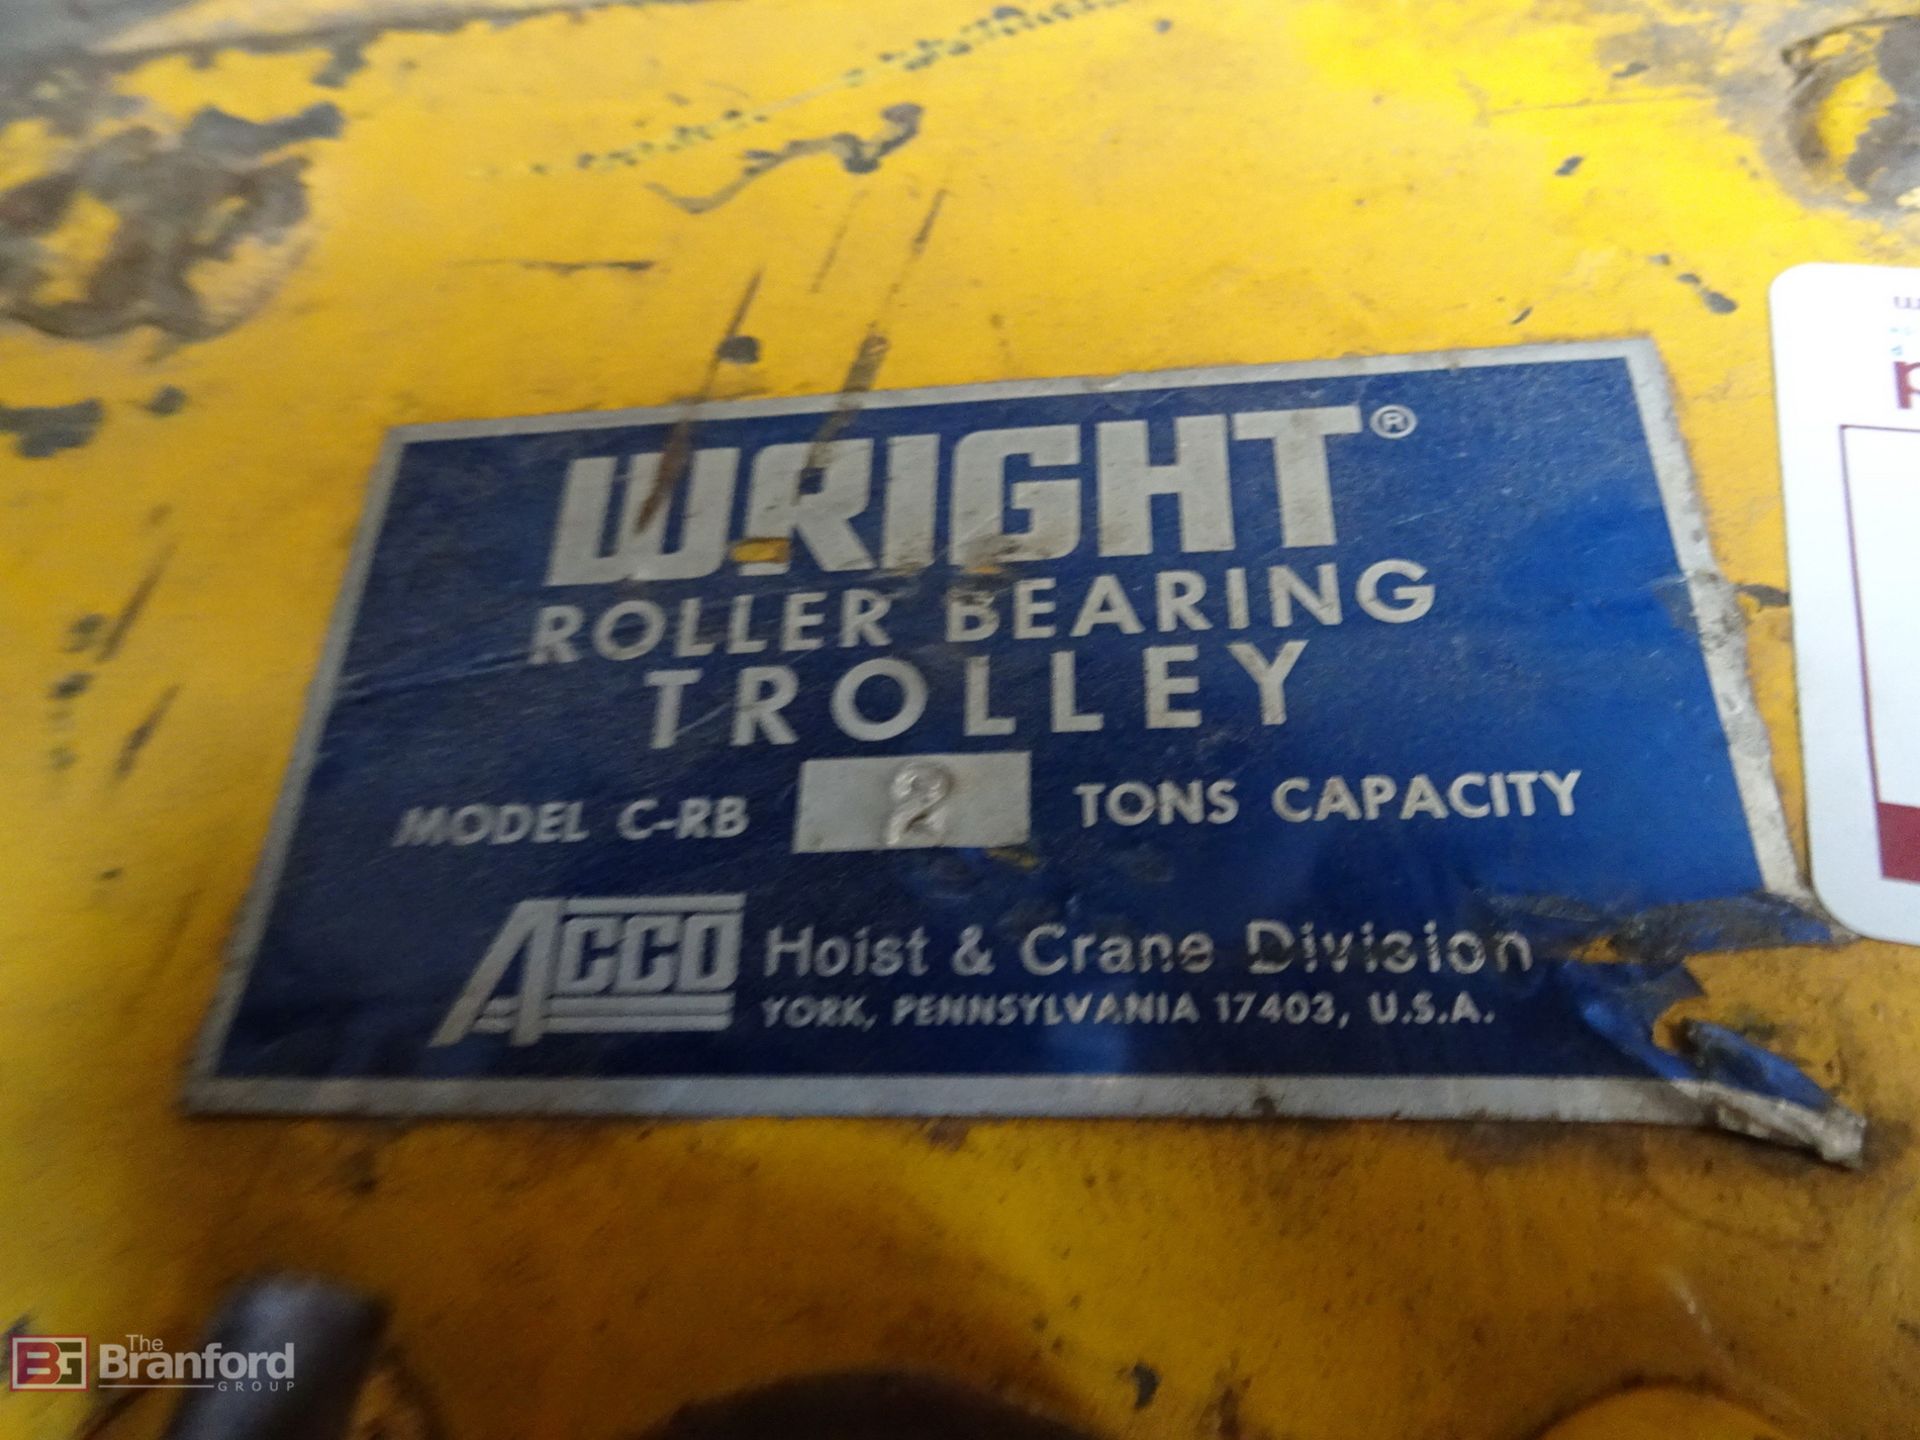 Wright Model C-RB, Roller Bearing Trolley - Image 2 of 2